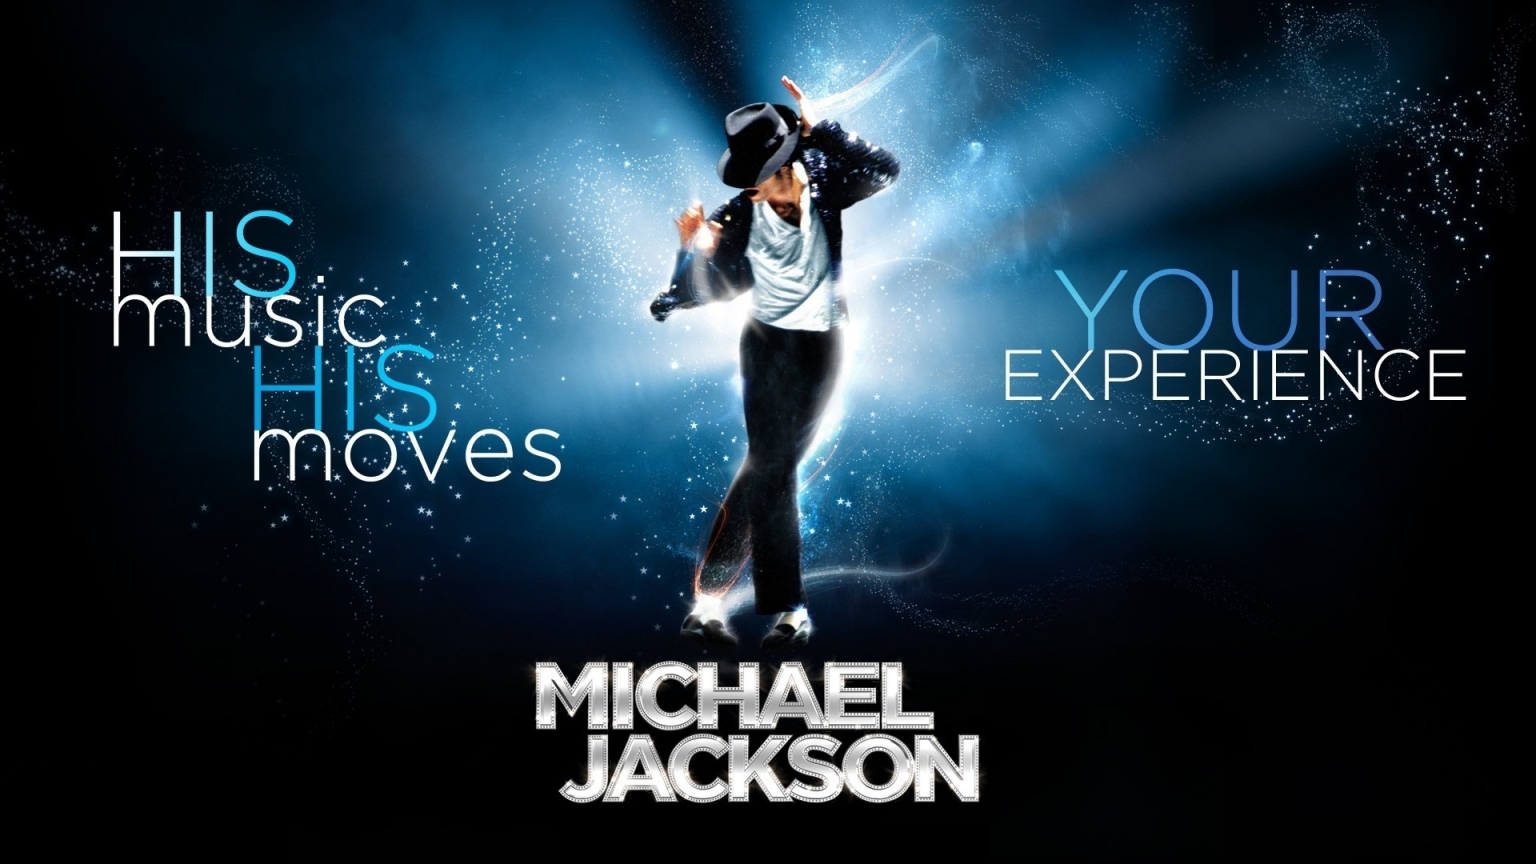 Michael Jackson Experience for 1536 x 864 HDTV resolution